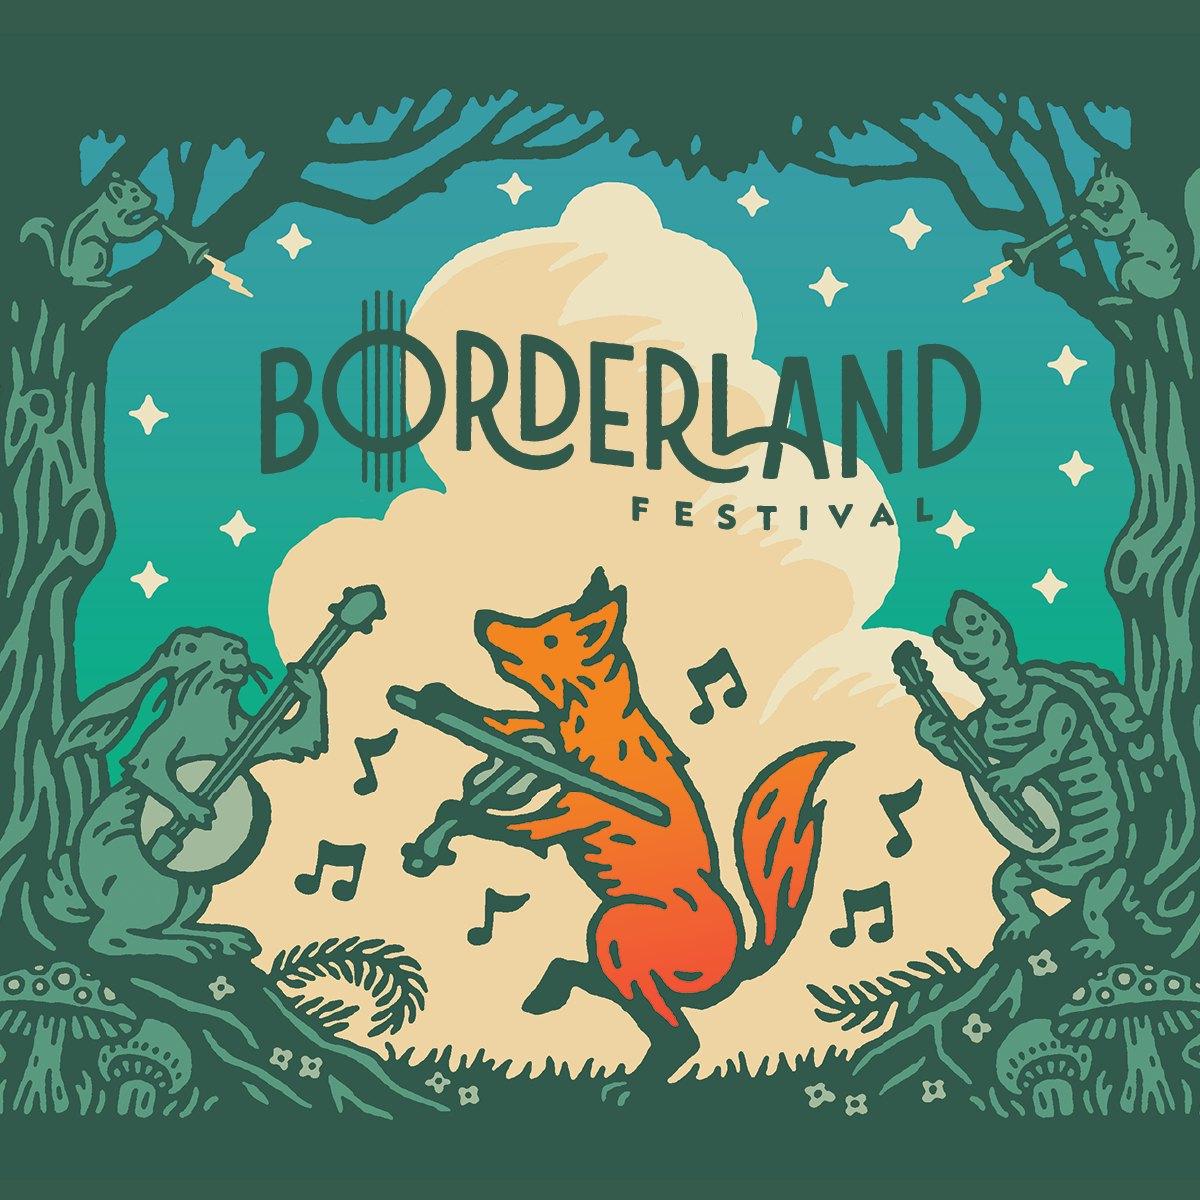 Borderland Festival Festival Lineup, Dates and Location